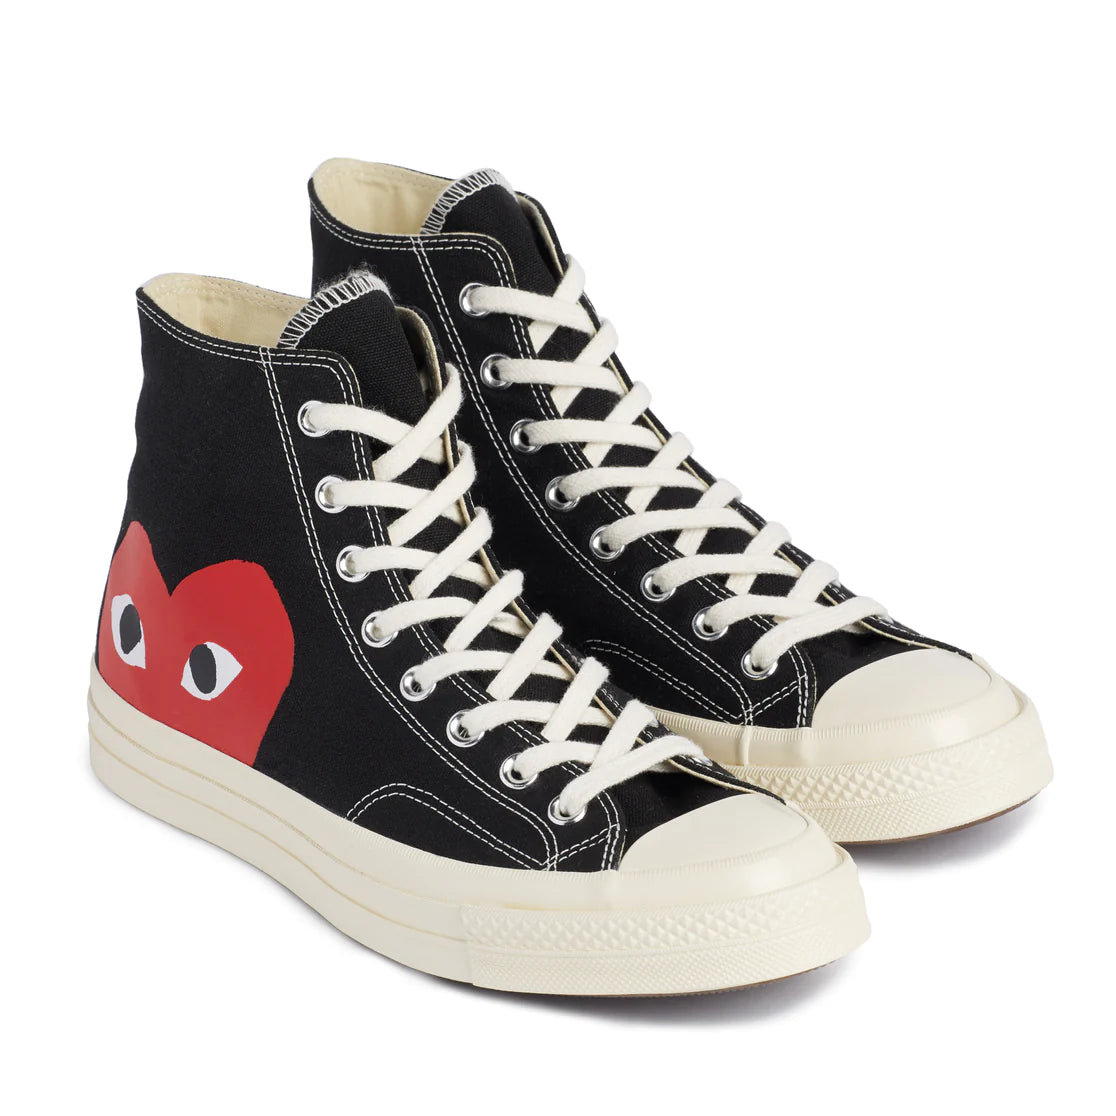 Red Heart Chuck Taylor All Star ’70 High (Black)